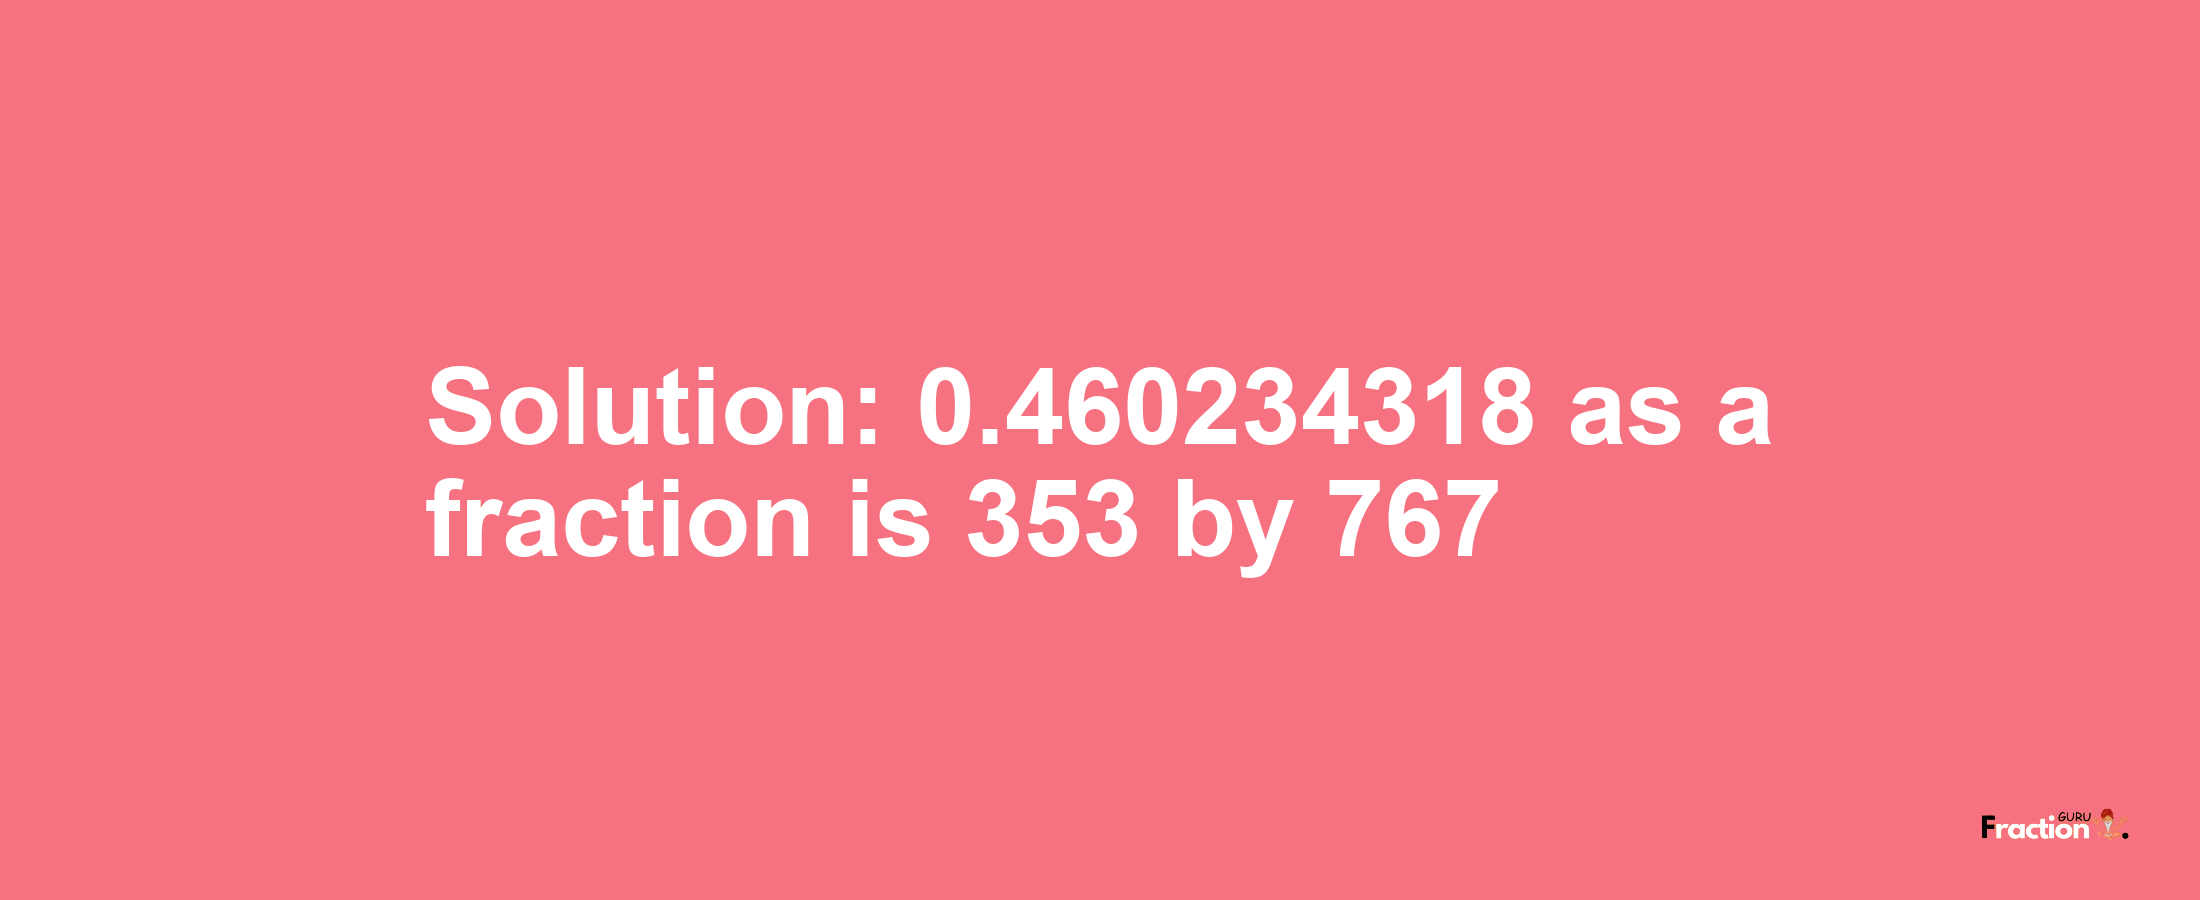 Solution:0.460234318 as a fraction is 353/767